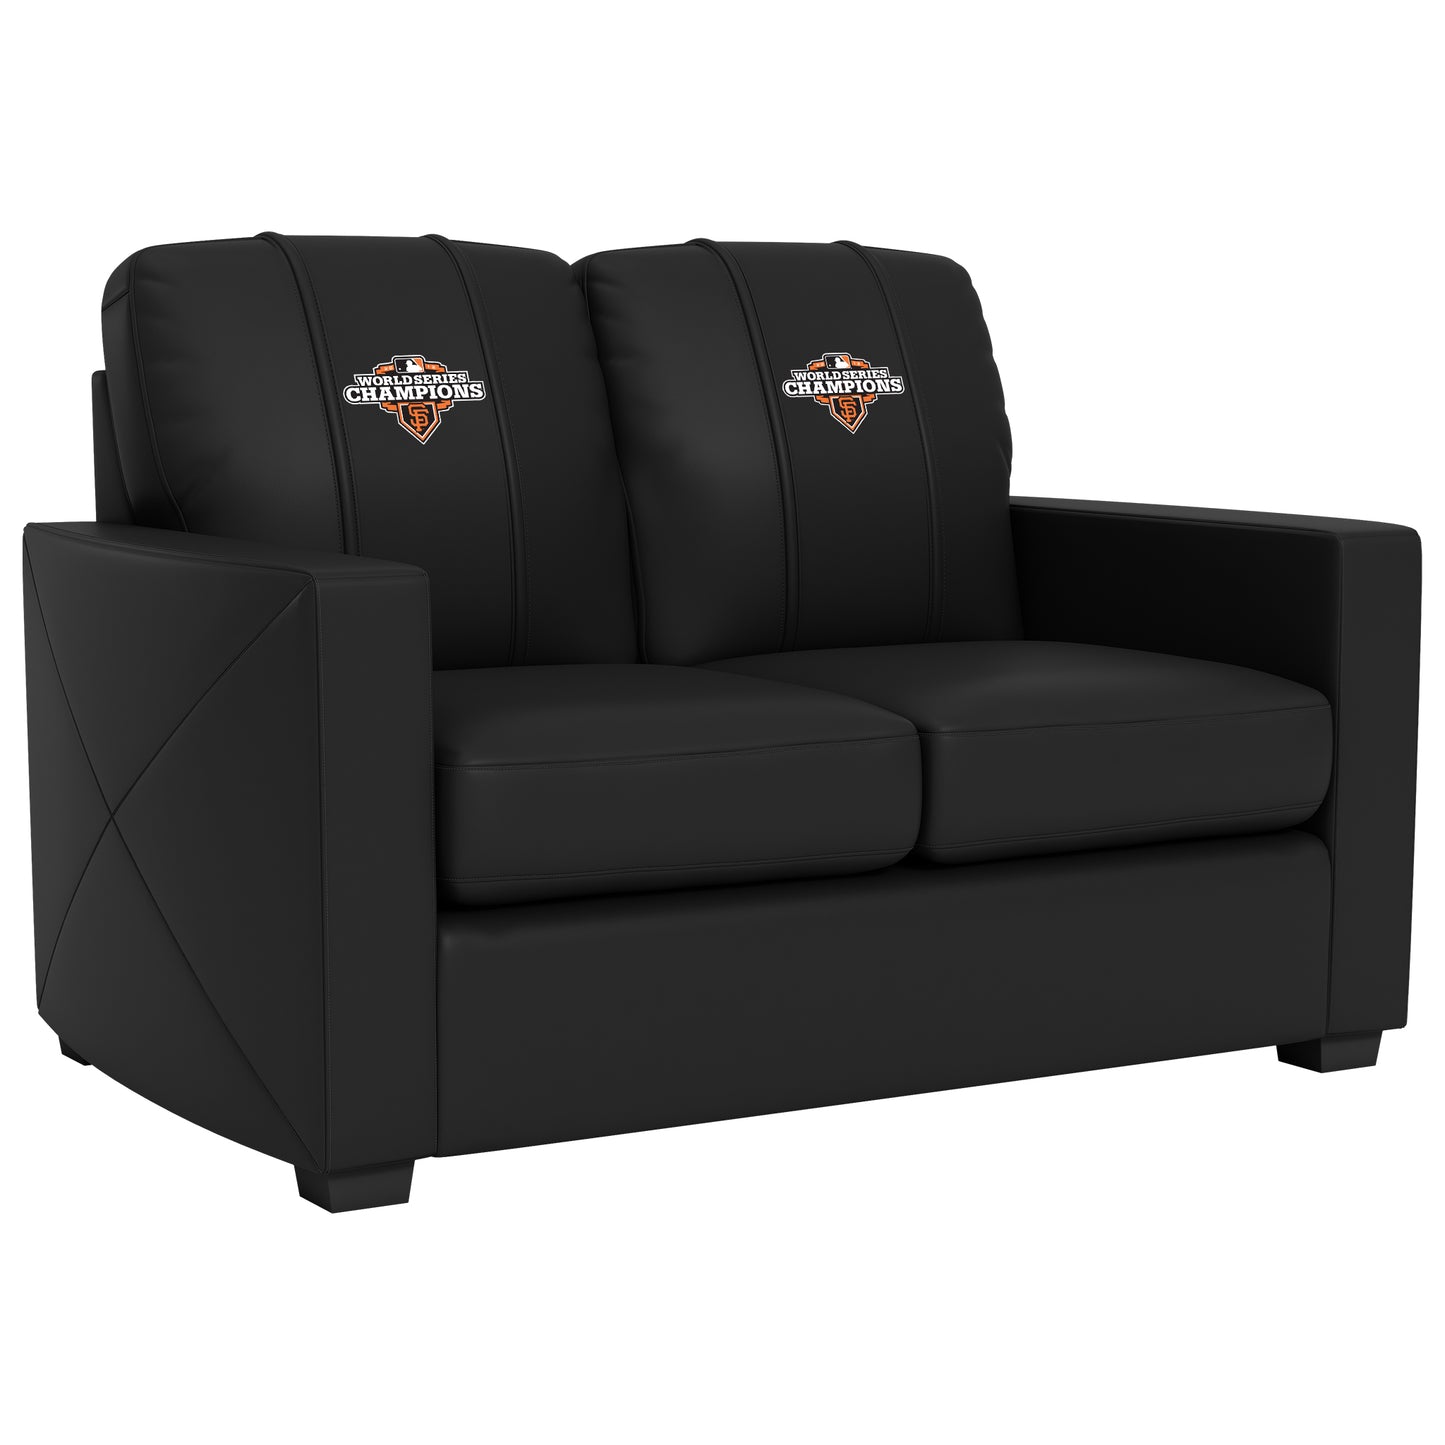 Silver Loveseat with San Francisco Giants Champs'12